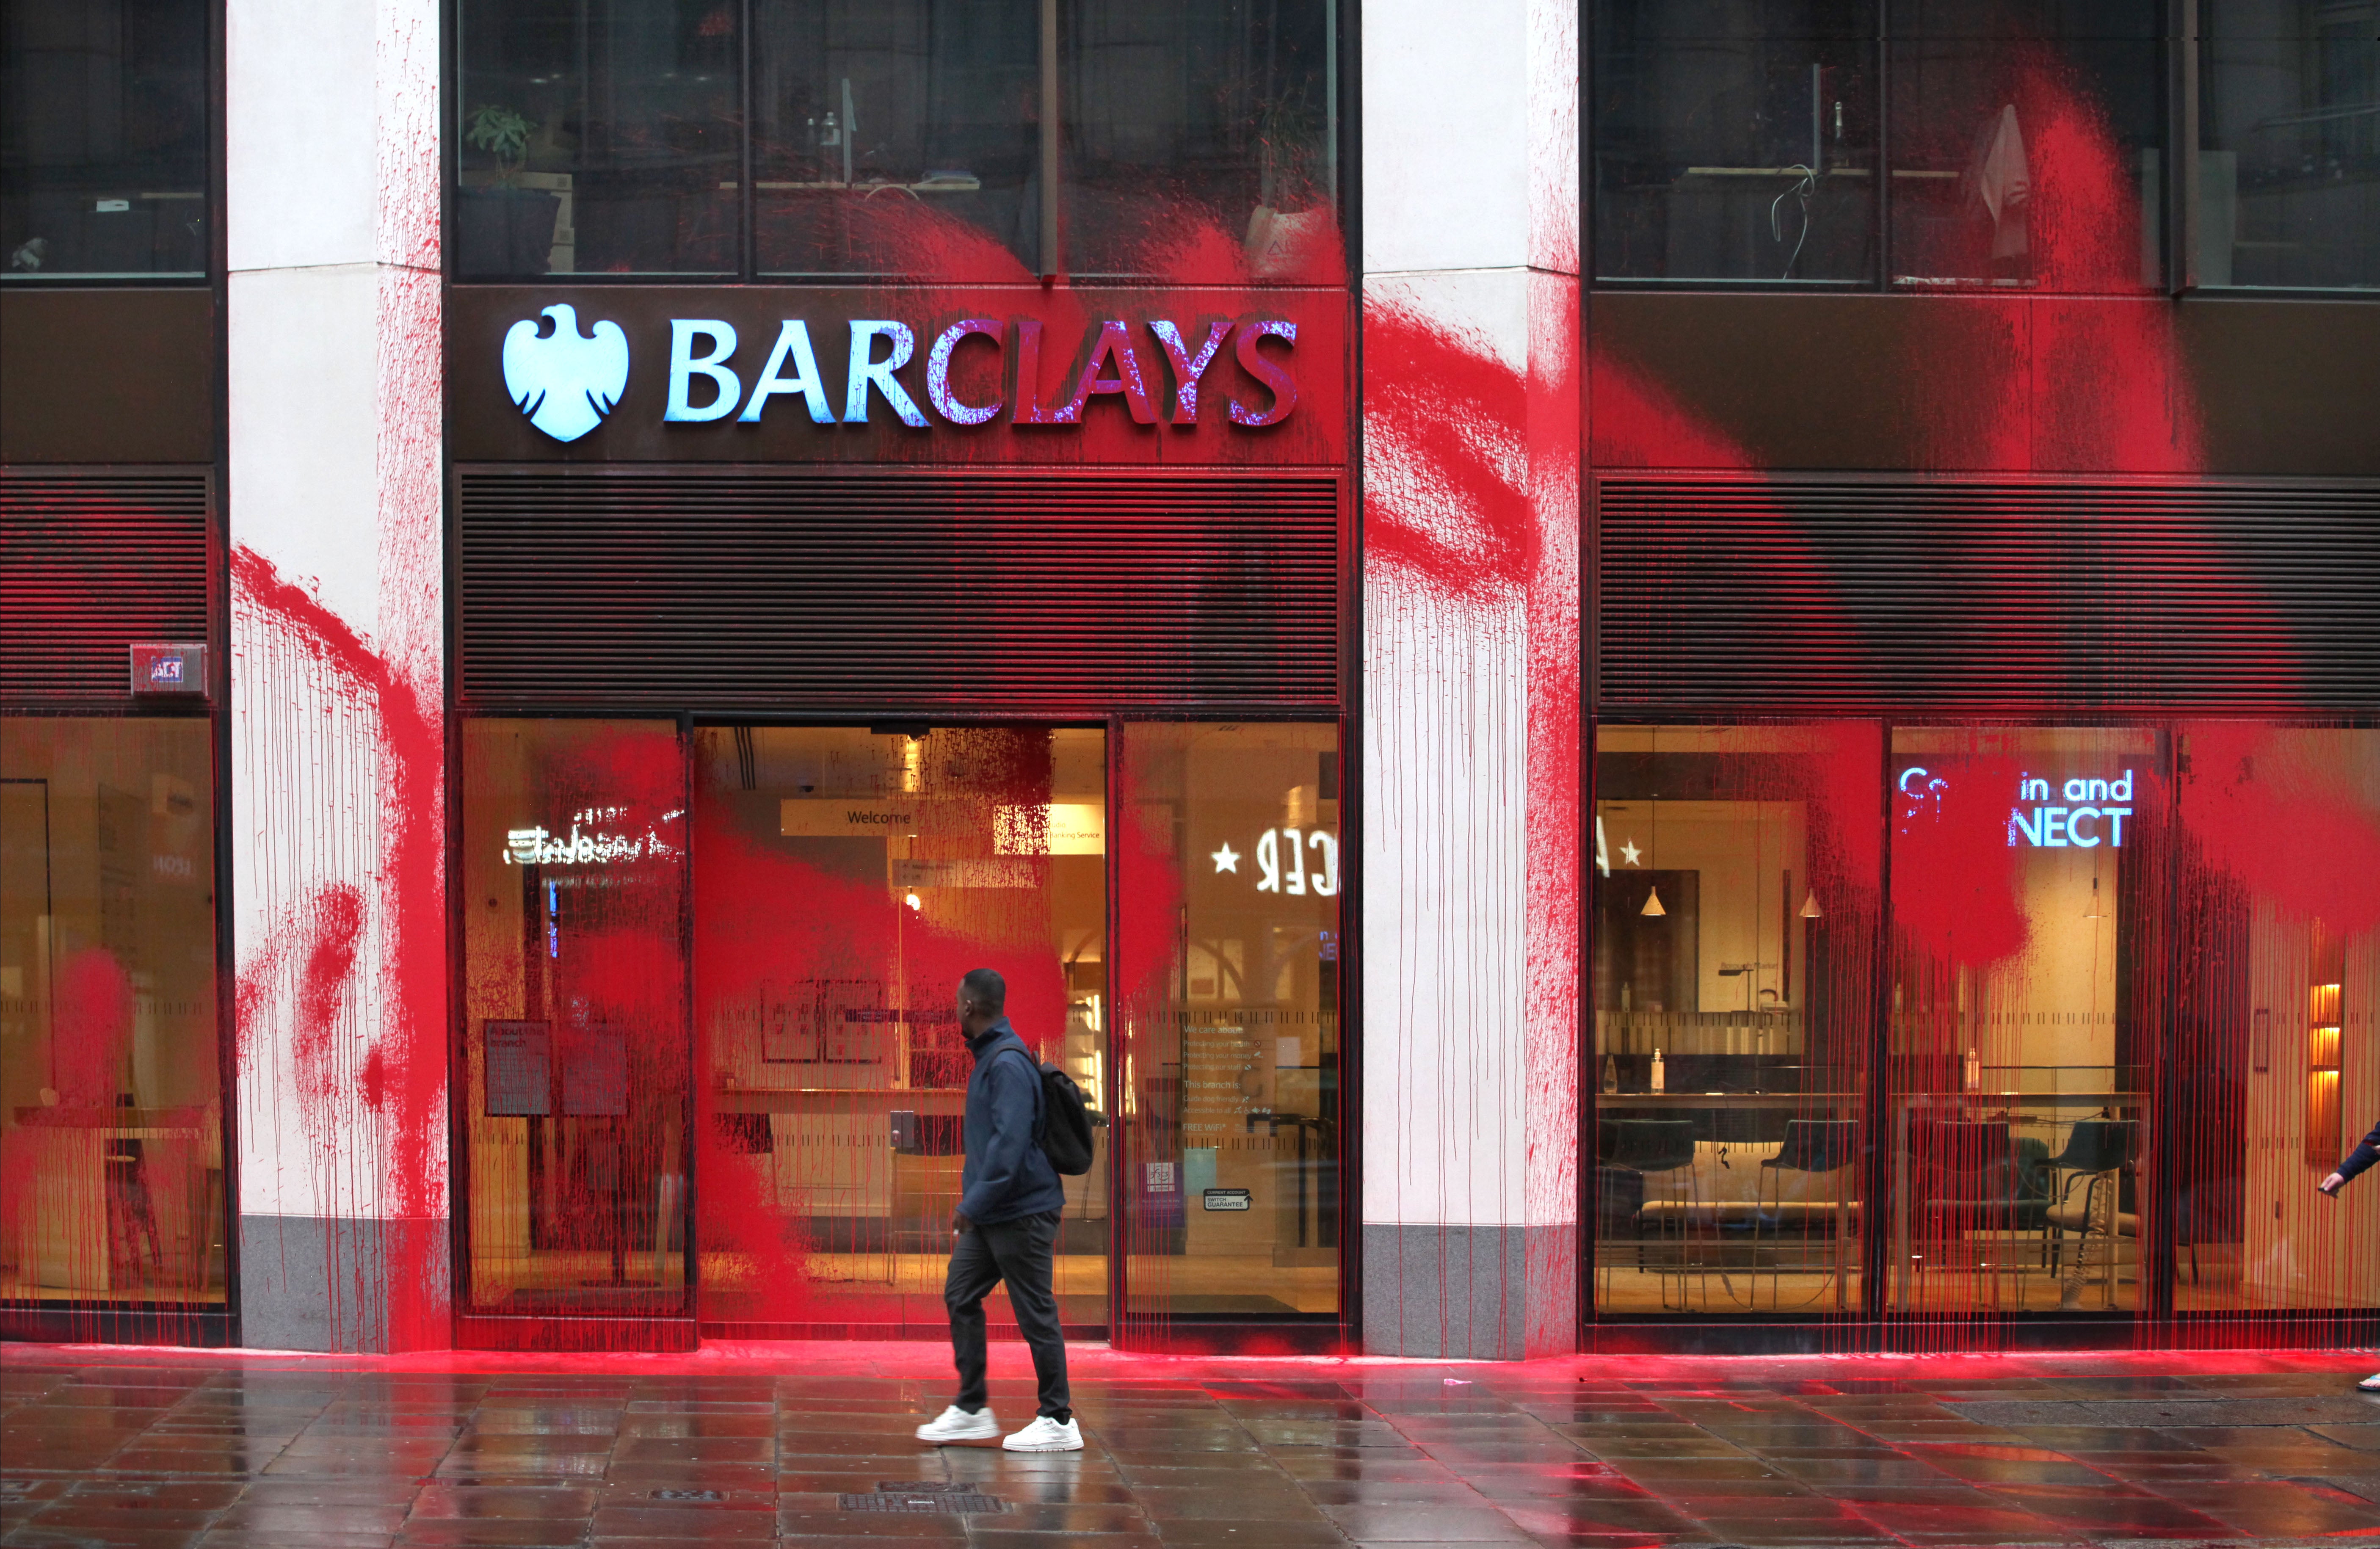 Barclays has been the target of pro-Palestine action